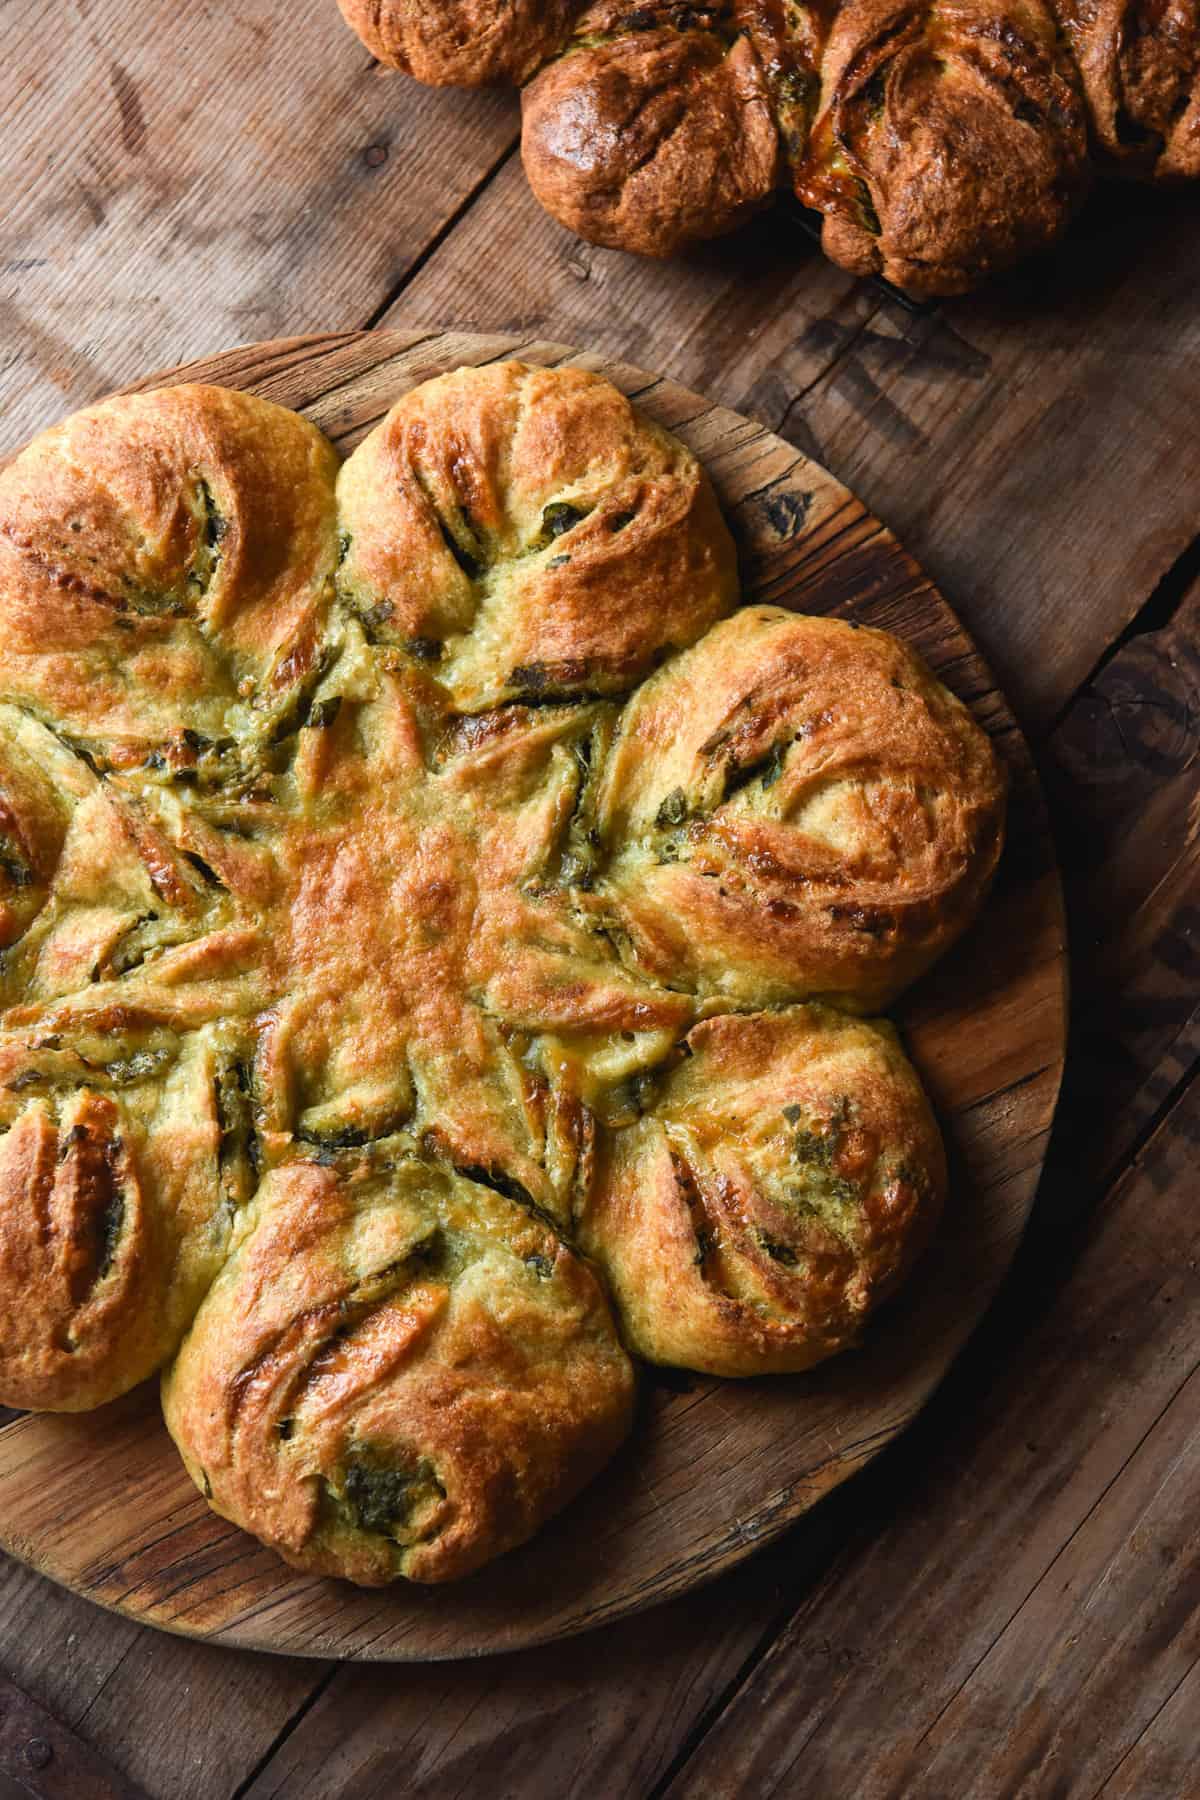 A gluten free pesto bread star sits atop a wooden board on a wooden backdrop in the bottom left corner of the image. A second pesto star sits in the top right hand corner of the image